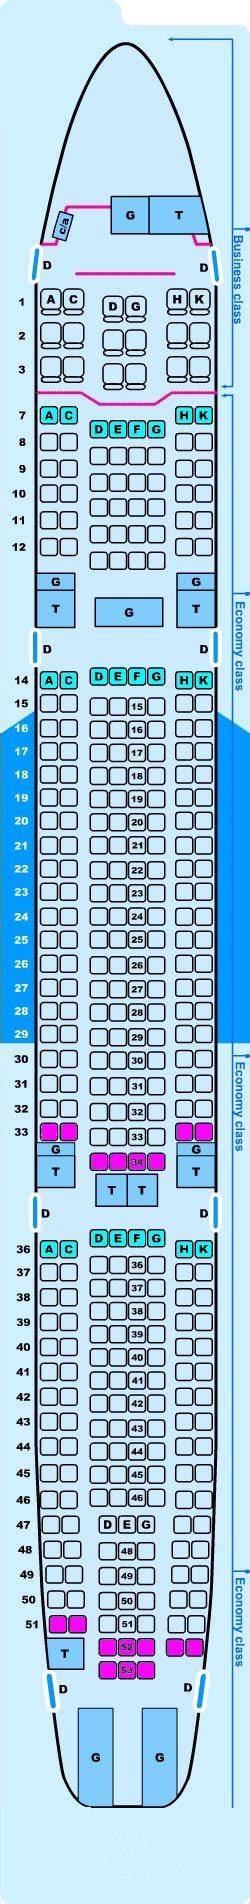 A330-300 airbus seating chart. Detailed seat map Finnair Airbus A330 300 263PAX. Find the best airplanes seats, information on legroom, recline and in-flight entertainment using our detailed online seating charts. 